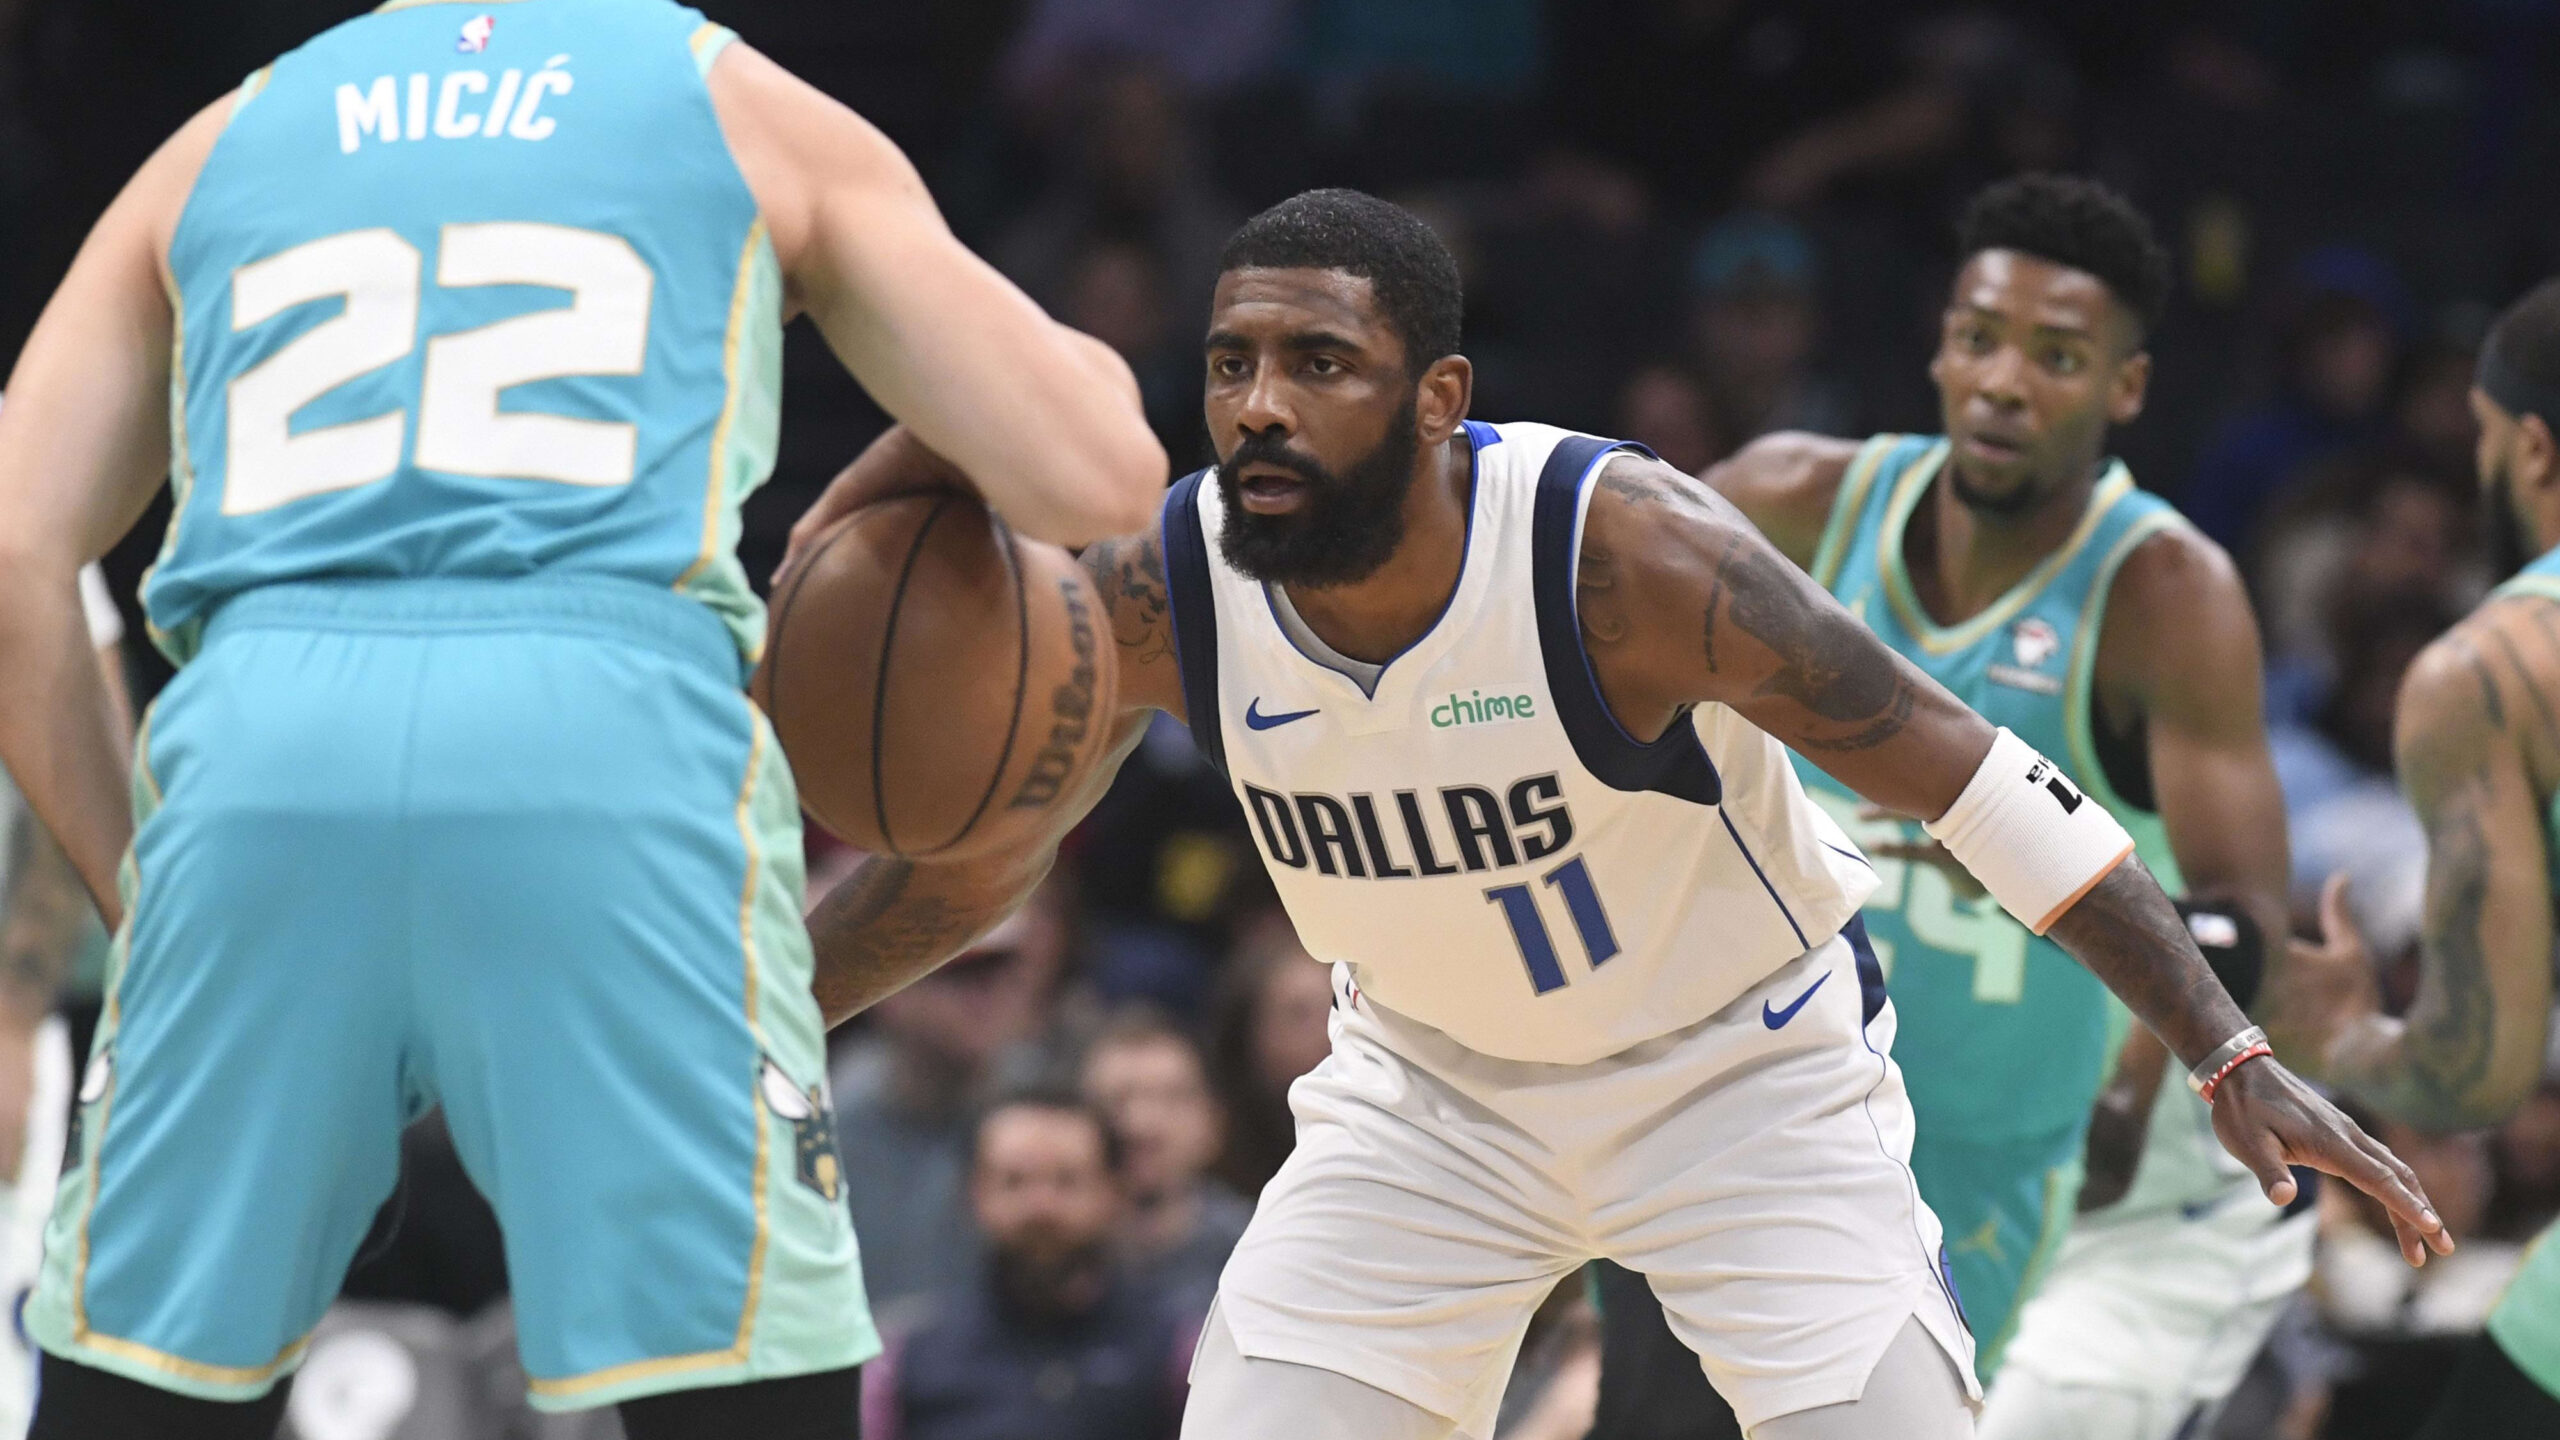 Mavs' Kyrie Irving Speaks on Team USA Olympic Roster Exclusion, Focuses on NBA Title Run